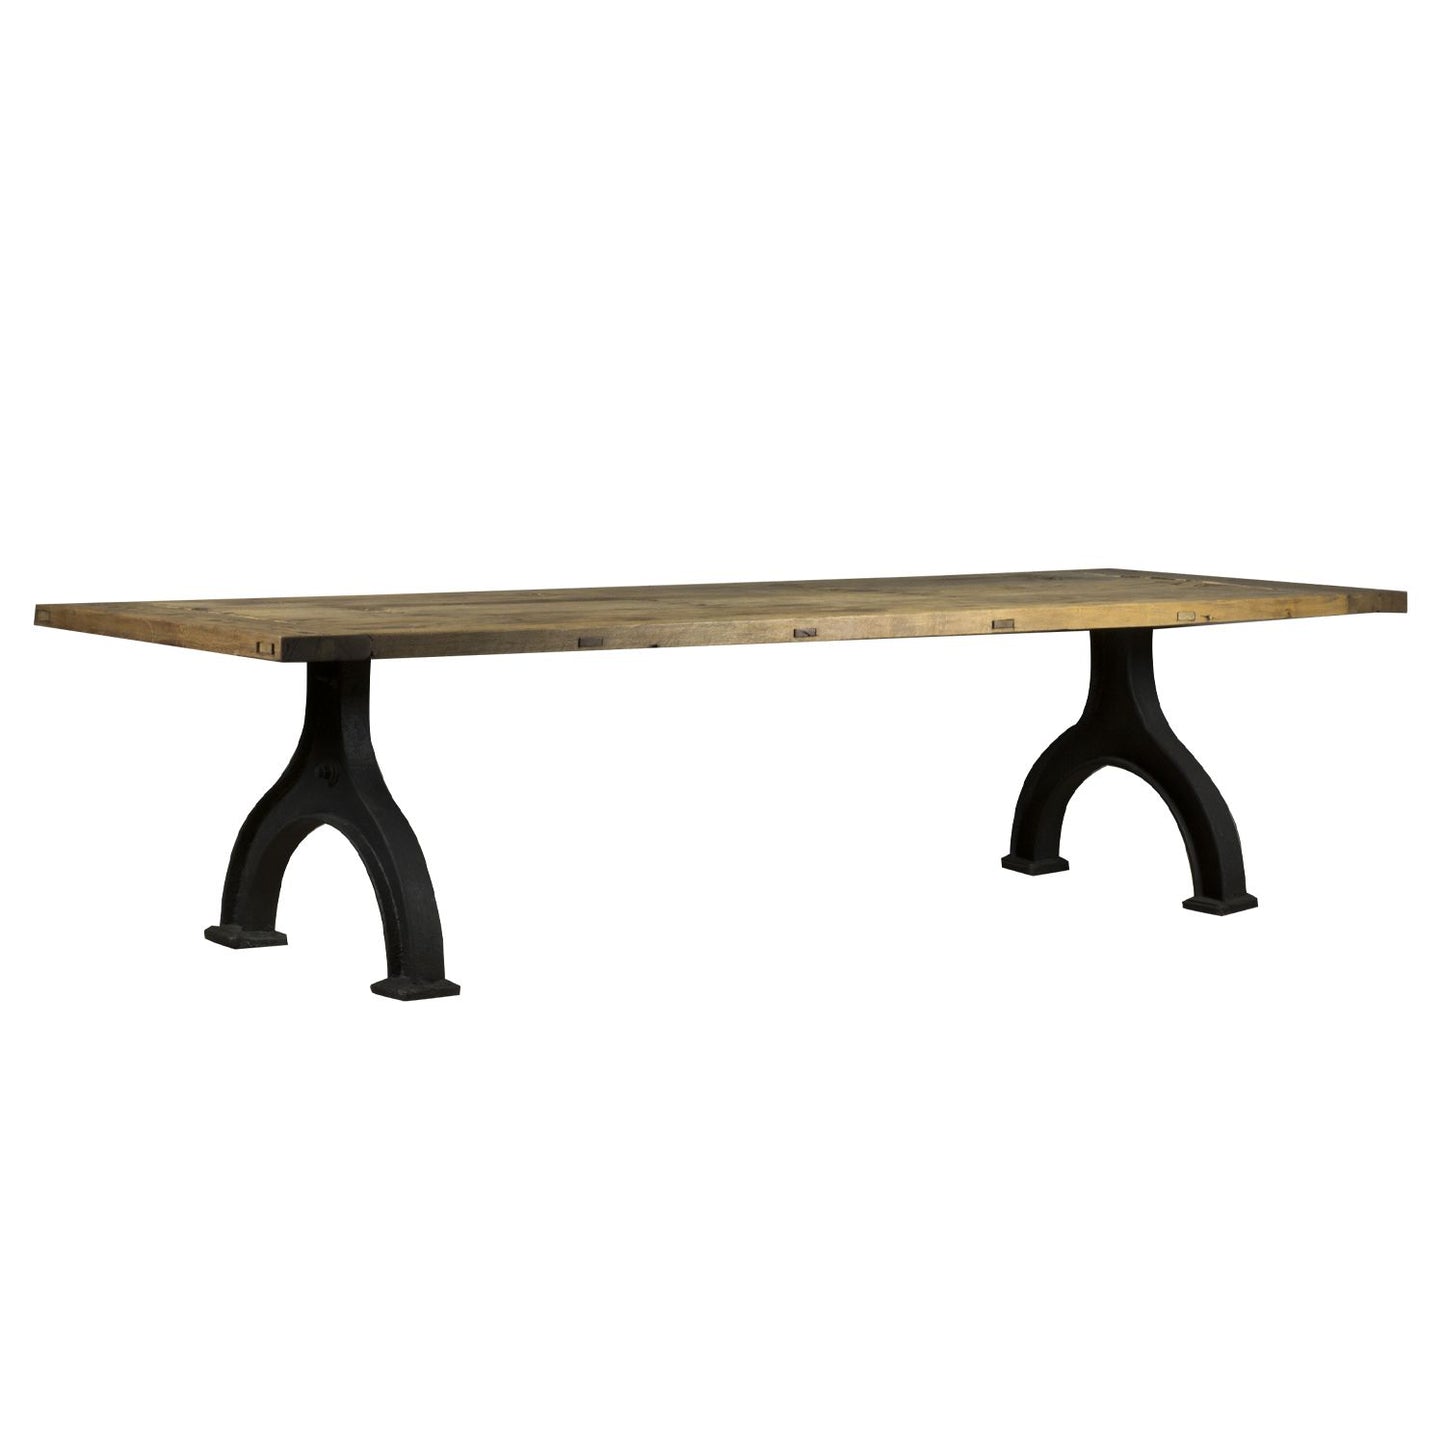 Monks Gate - Boatwood Dining Table With Metal Legs - 240cm